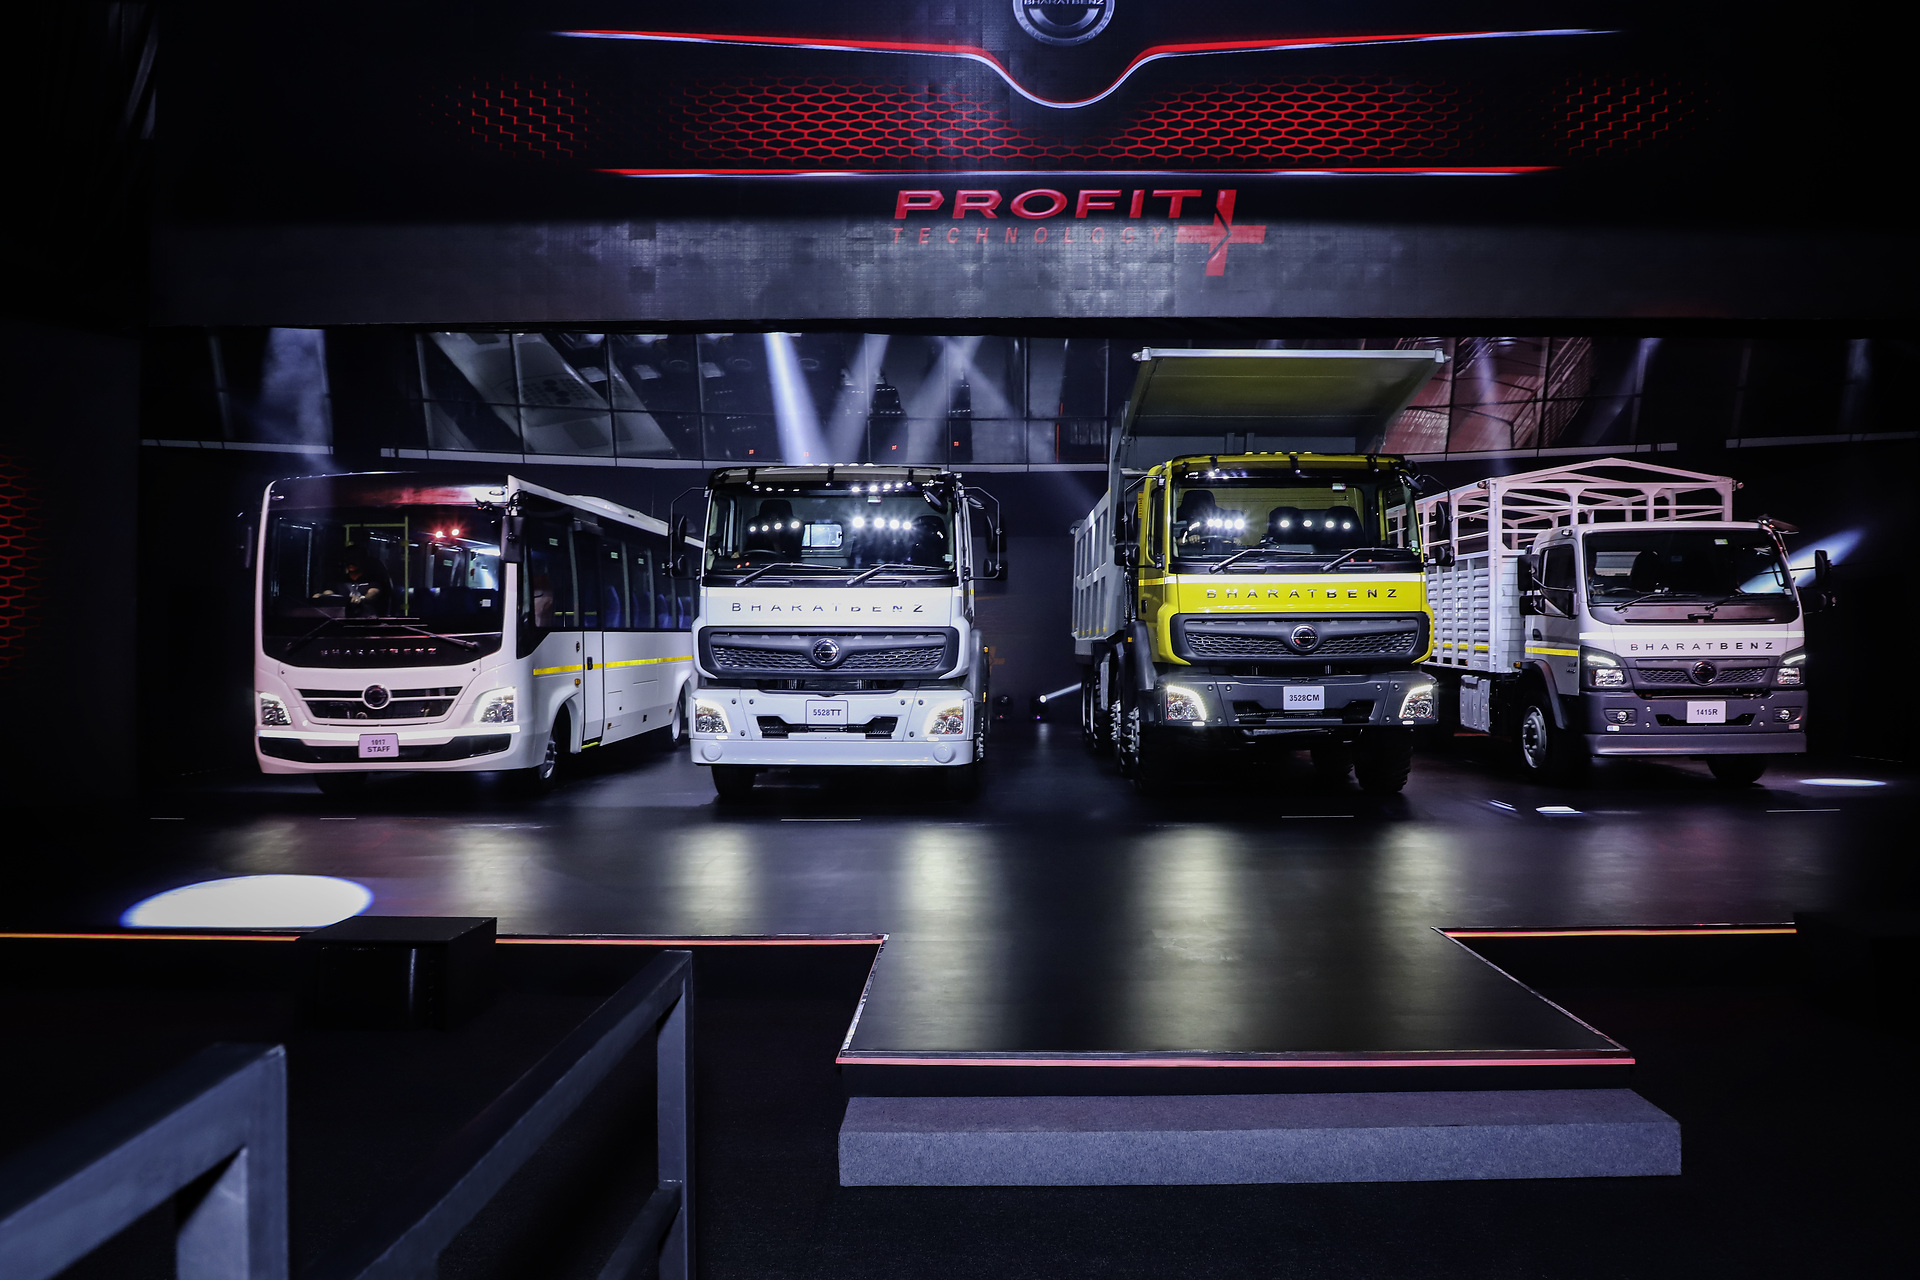 Daimler subsidiary premieres all-new commercial vehicle portfolio for India